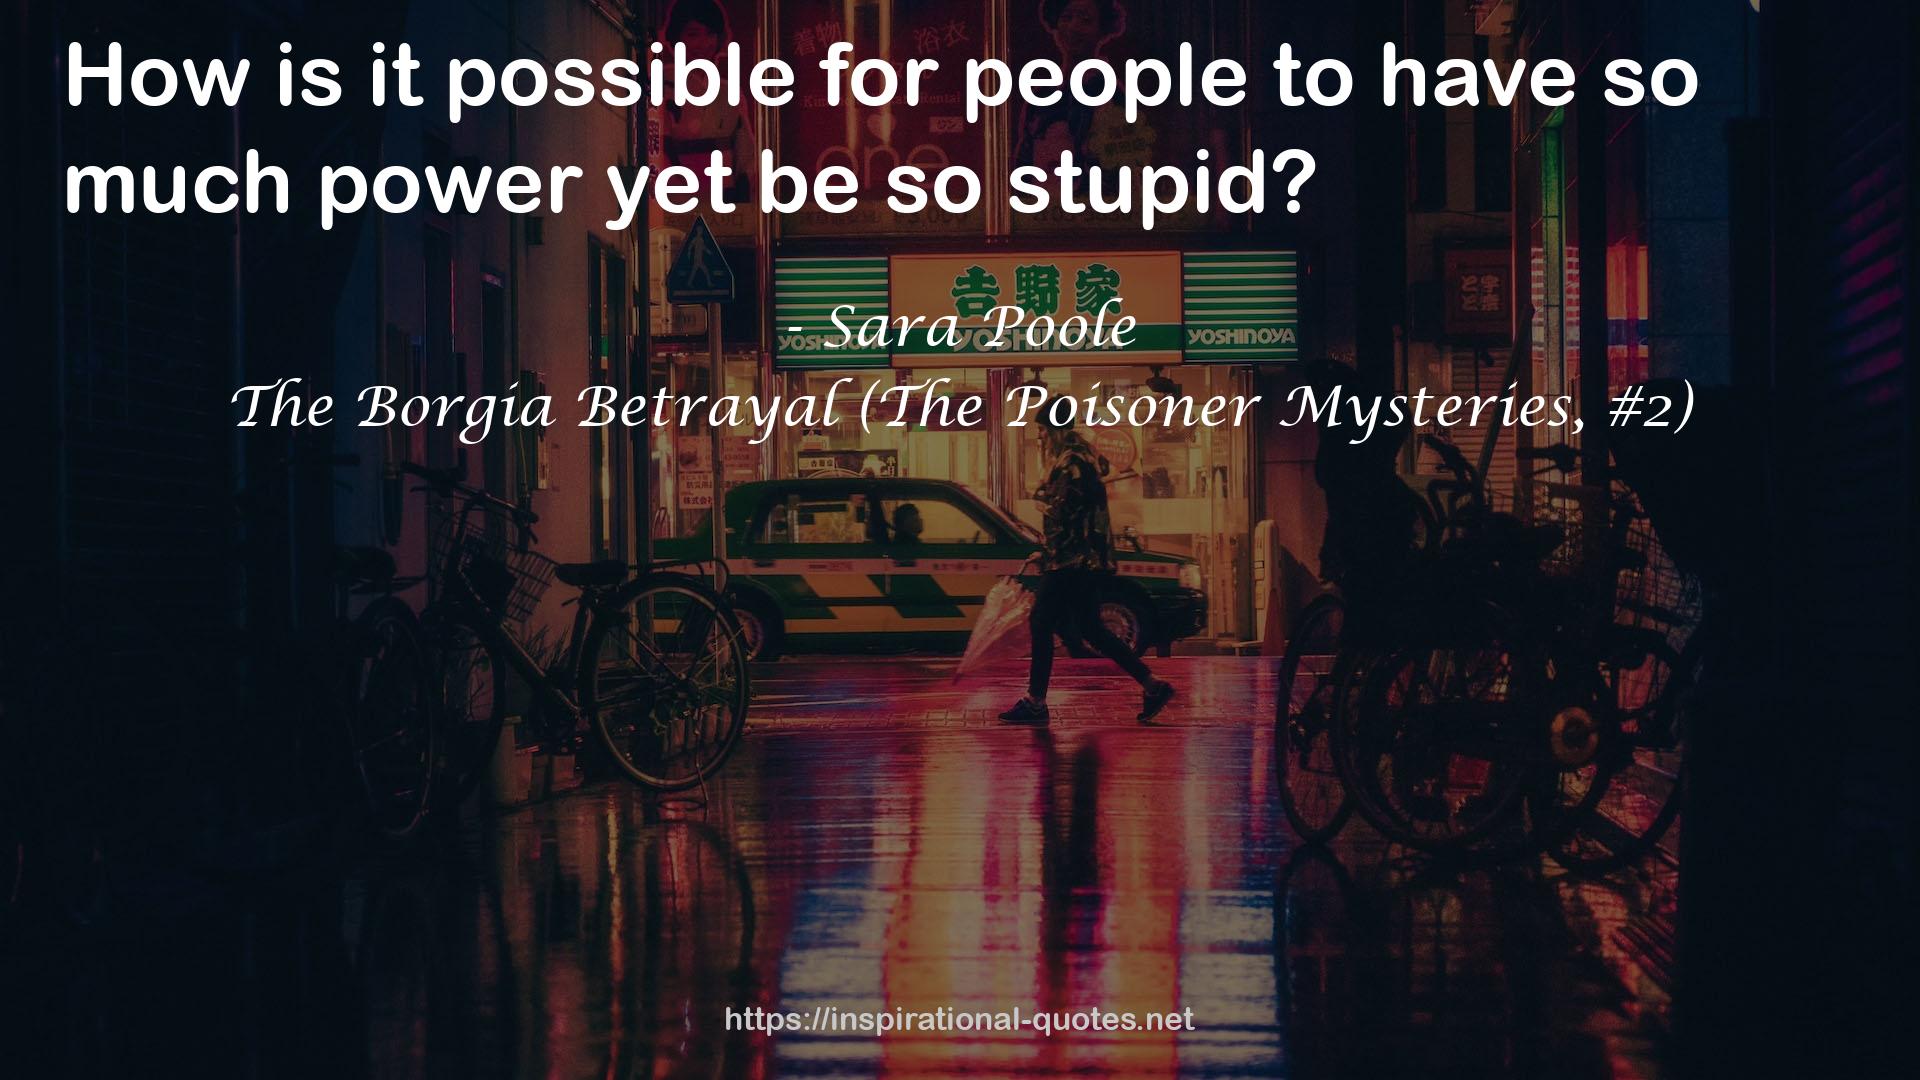 The Borgia Betrayal (The Poisoner Mysteries, #2) QUOTES